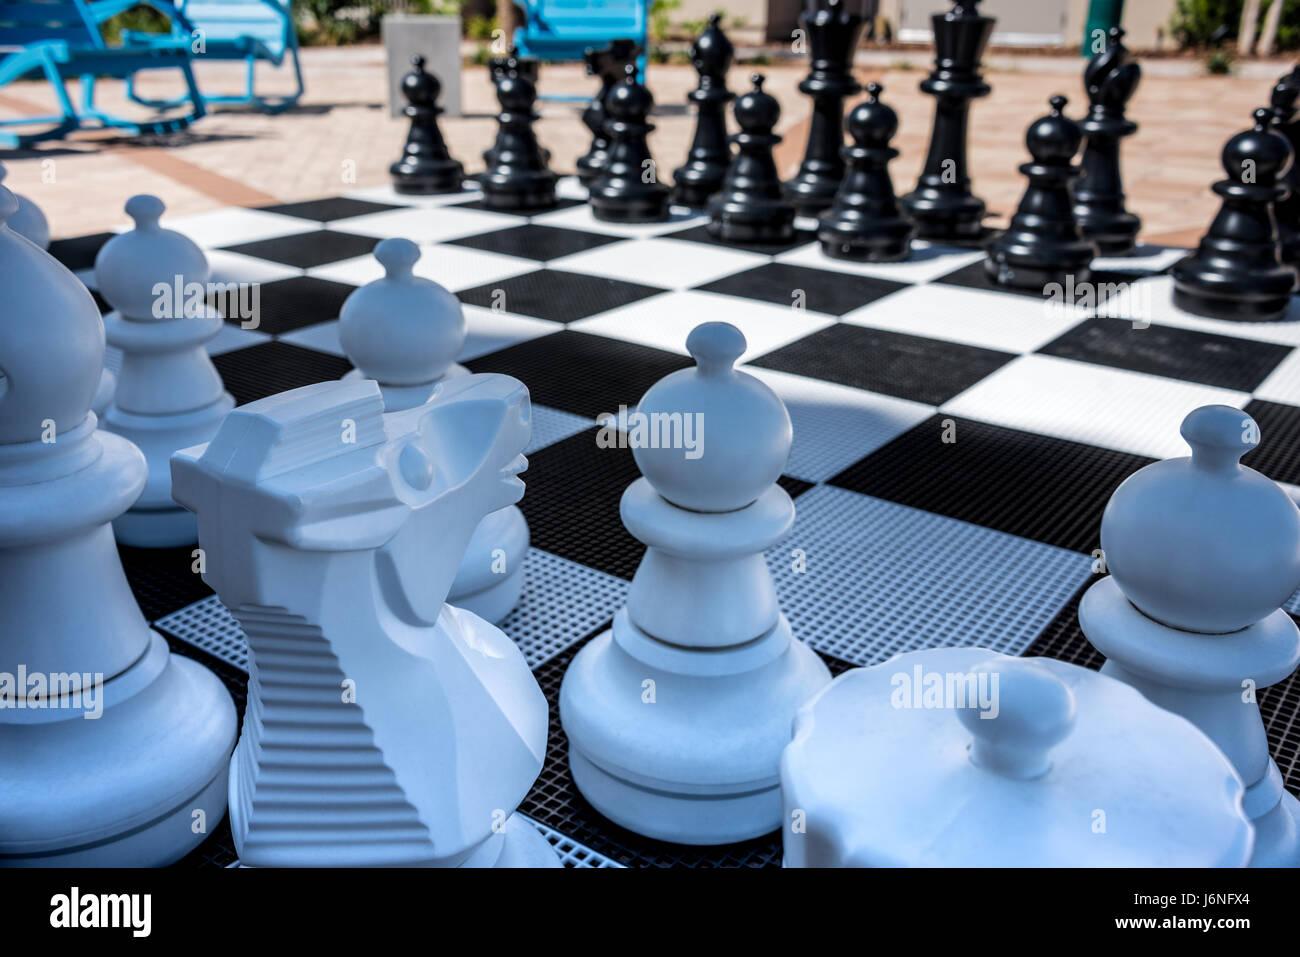 Large outdoor chess board in a courtyard at Harbortown Marina in Jacksonville, Florida, USA. Stock Photo